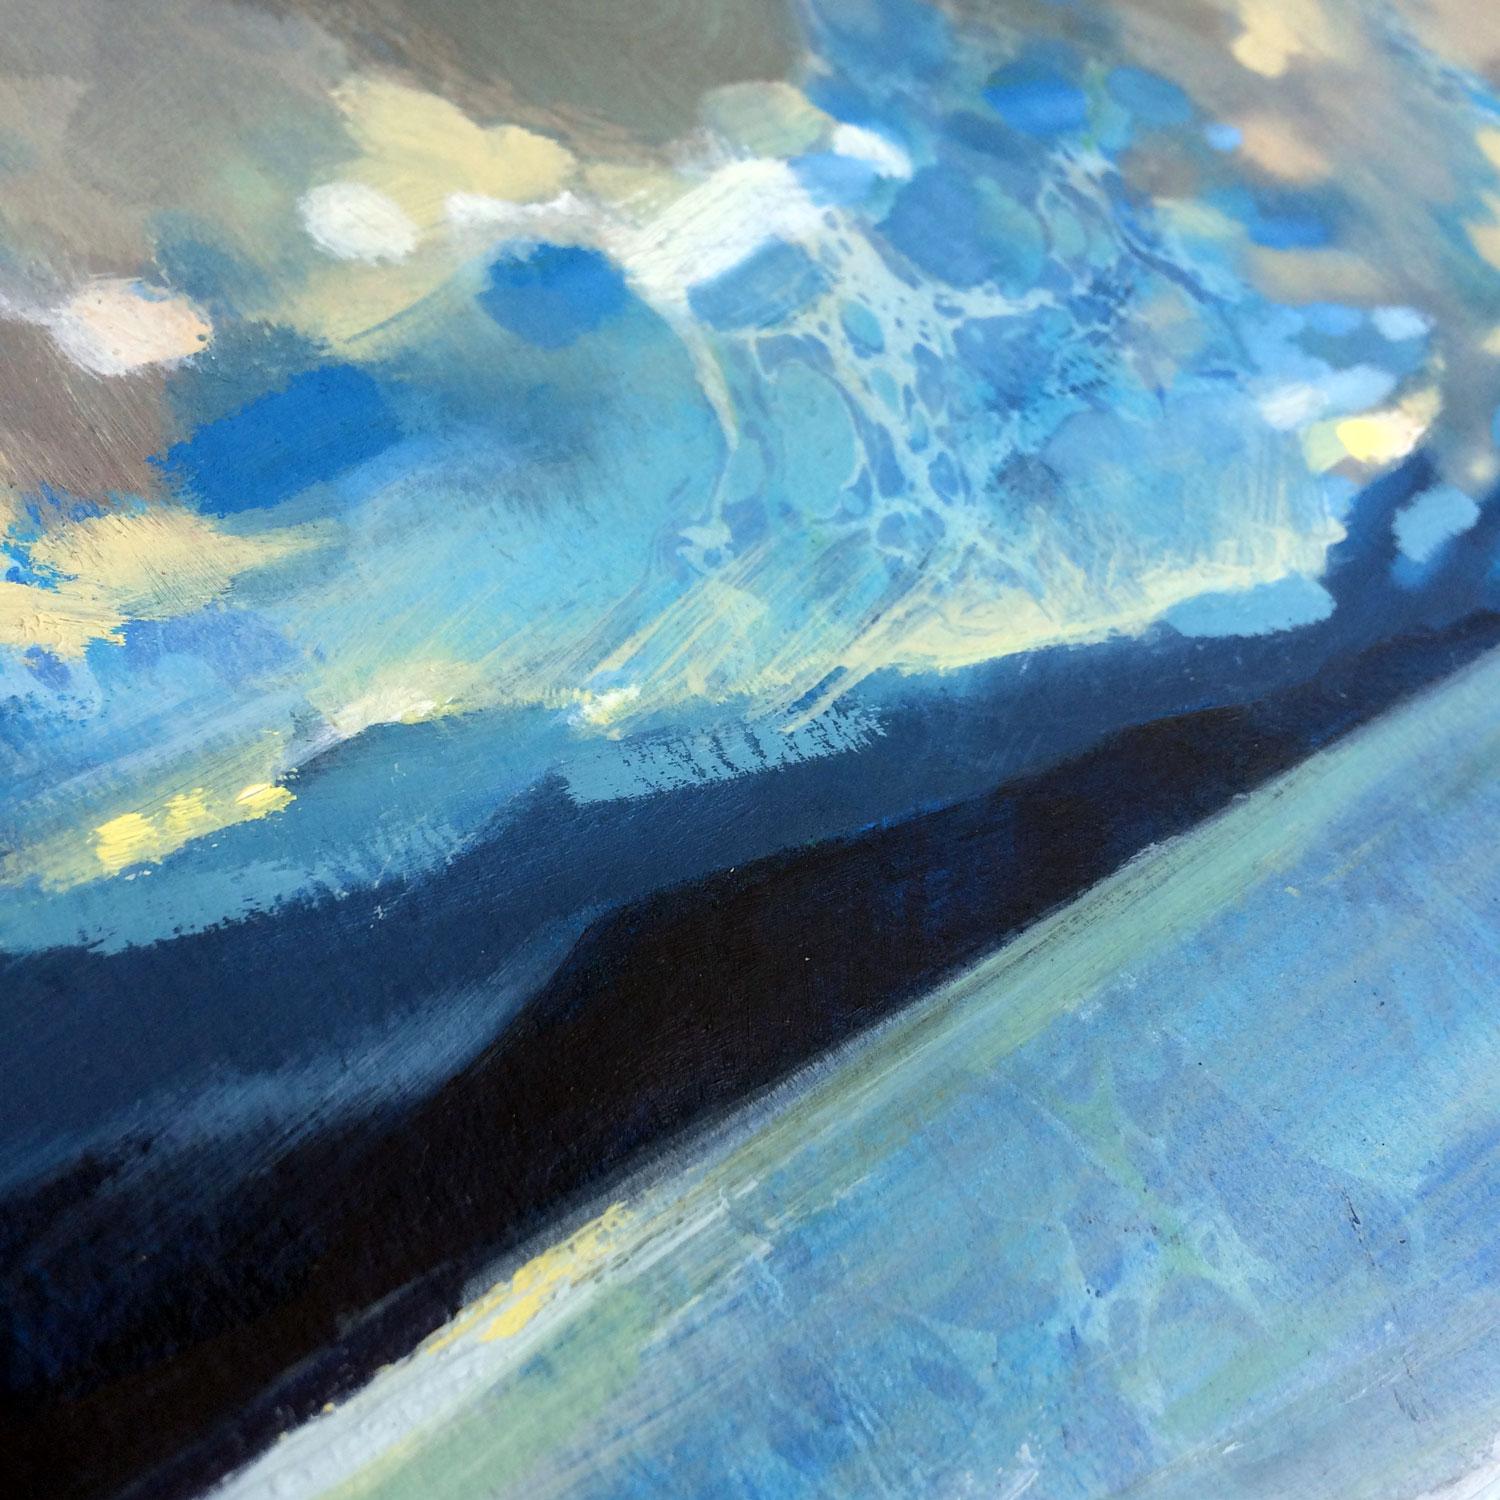 Rachel Painter
The Dawn From Upon High
Original Landscape Painting
Oil On Paper
Image Size: 40 x 30 cm
Sold Unframed
Free Shipping
Please note that in situ images are purely an indication of how a piece may look.

‘The Dawn From Upon High’, an